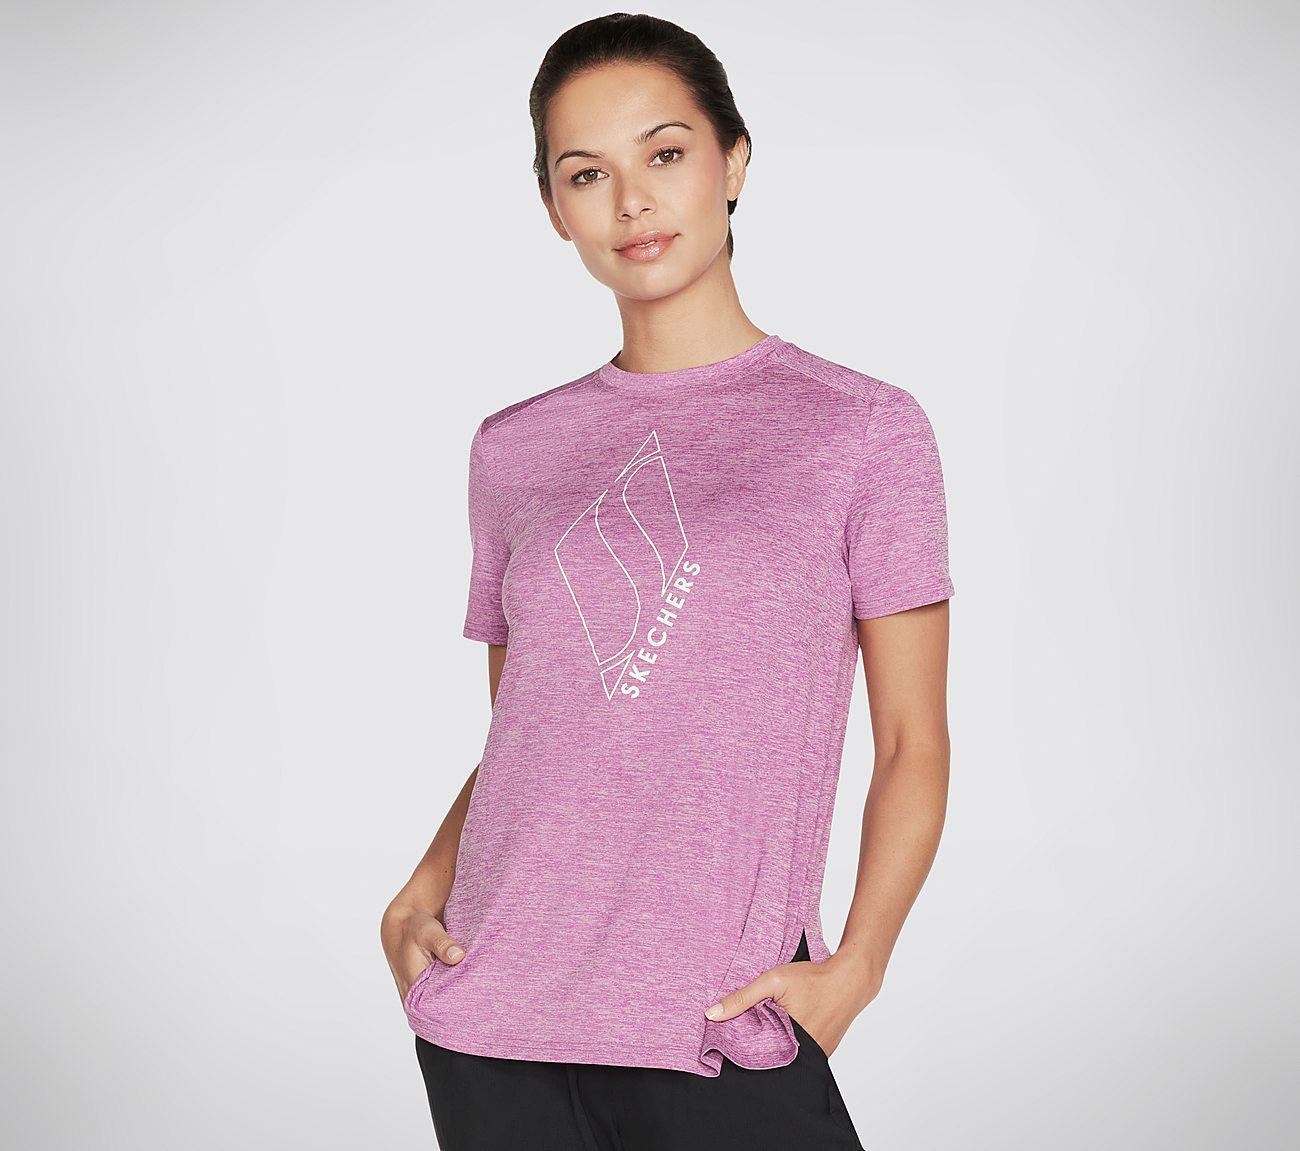 DIAMOND BLISSFUL TEE, PURPLE/HOT PINK Apparel Lateral View